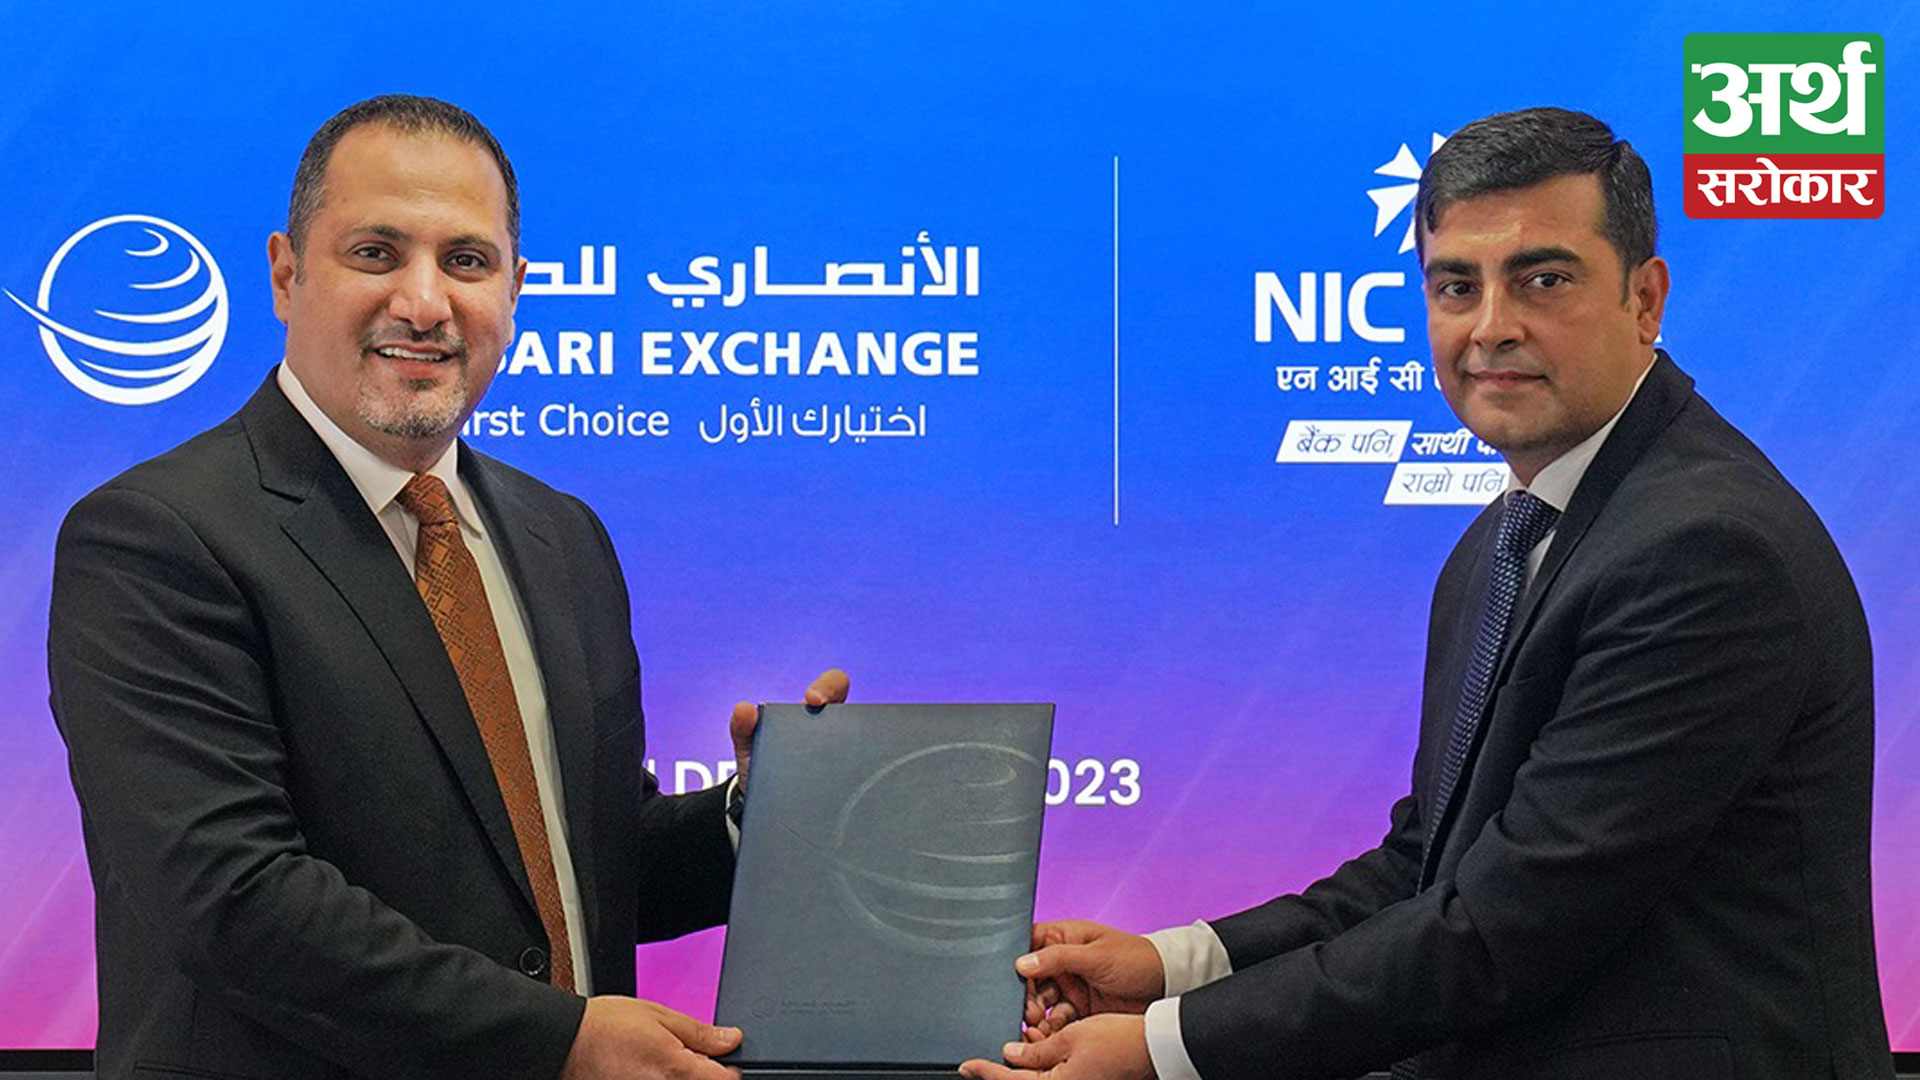 NIC Asia Bank and UAE-based Al Ansari Exchange join hands for partnership to strengthen inward remittance to Nepal